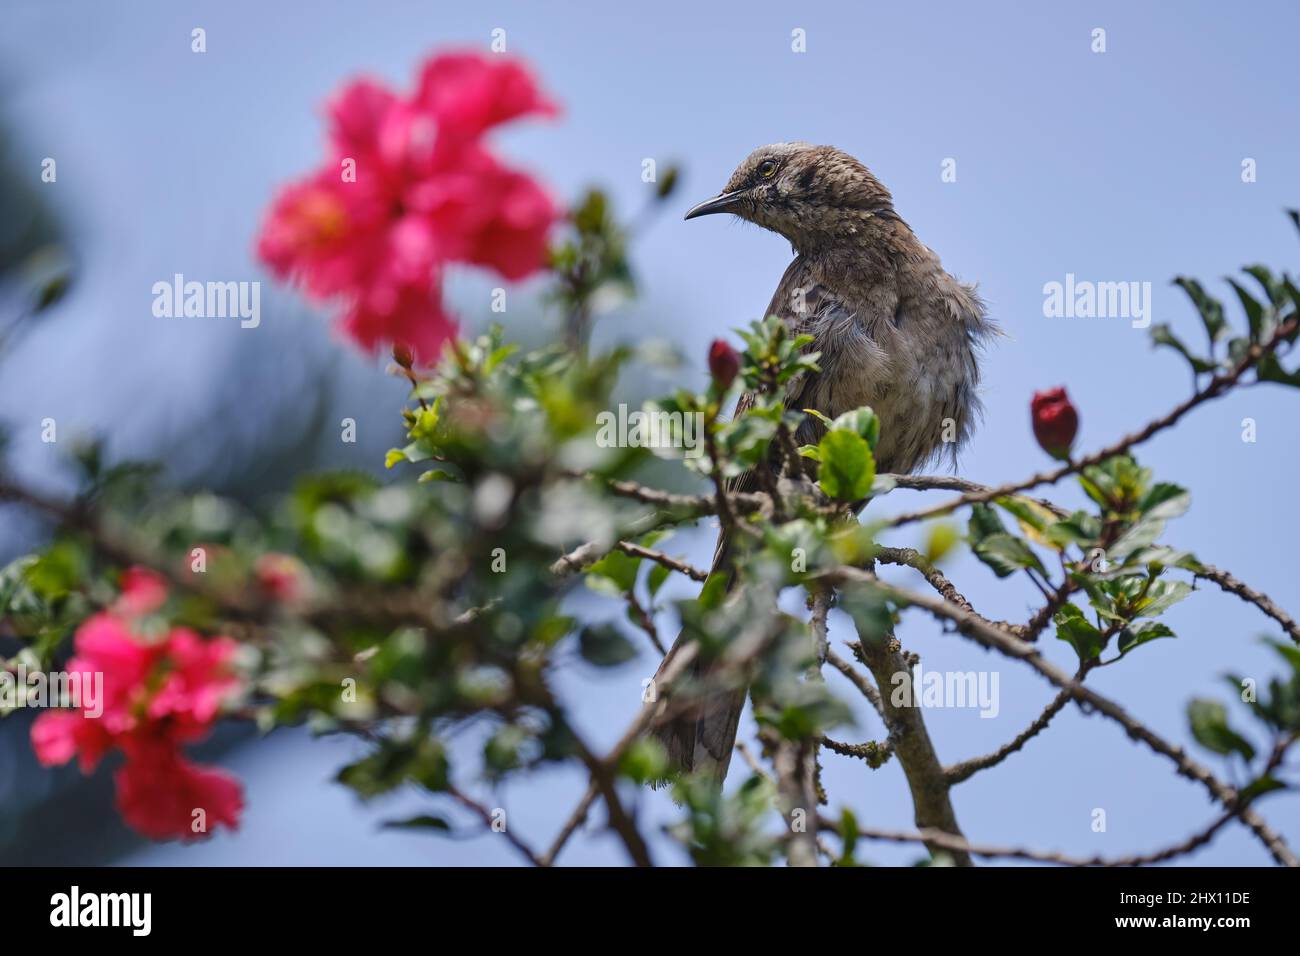 Long tailed Mockingbird (Mimus longicaudatus), perched on the branches of a bush among flowers. Stock Photo